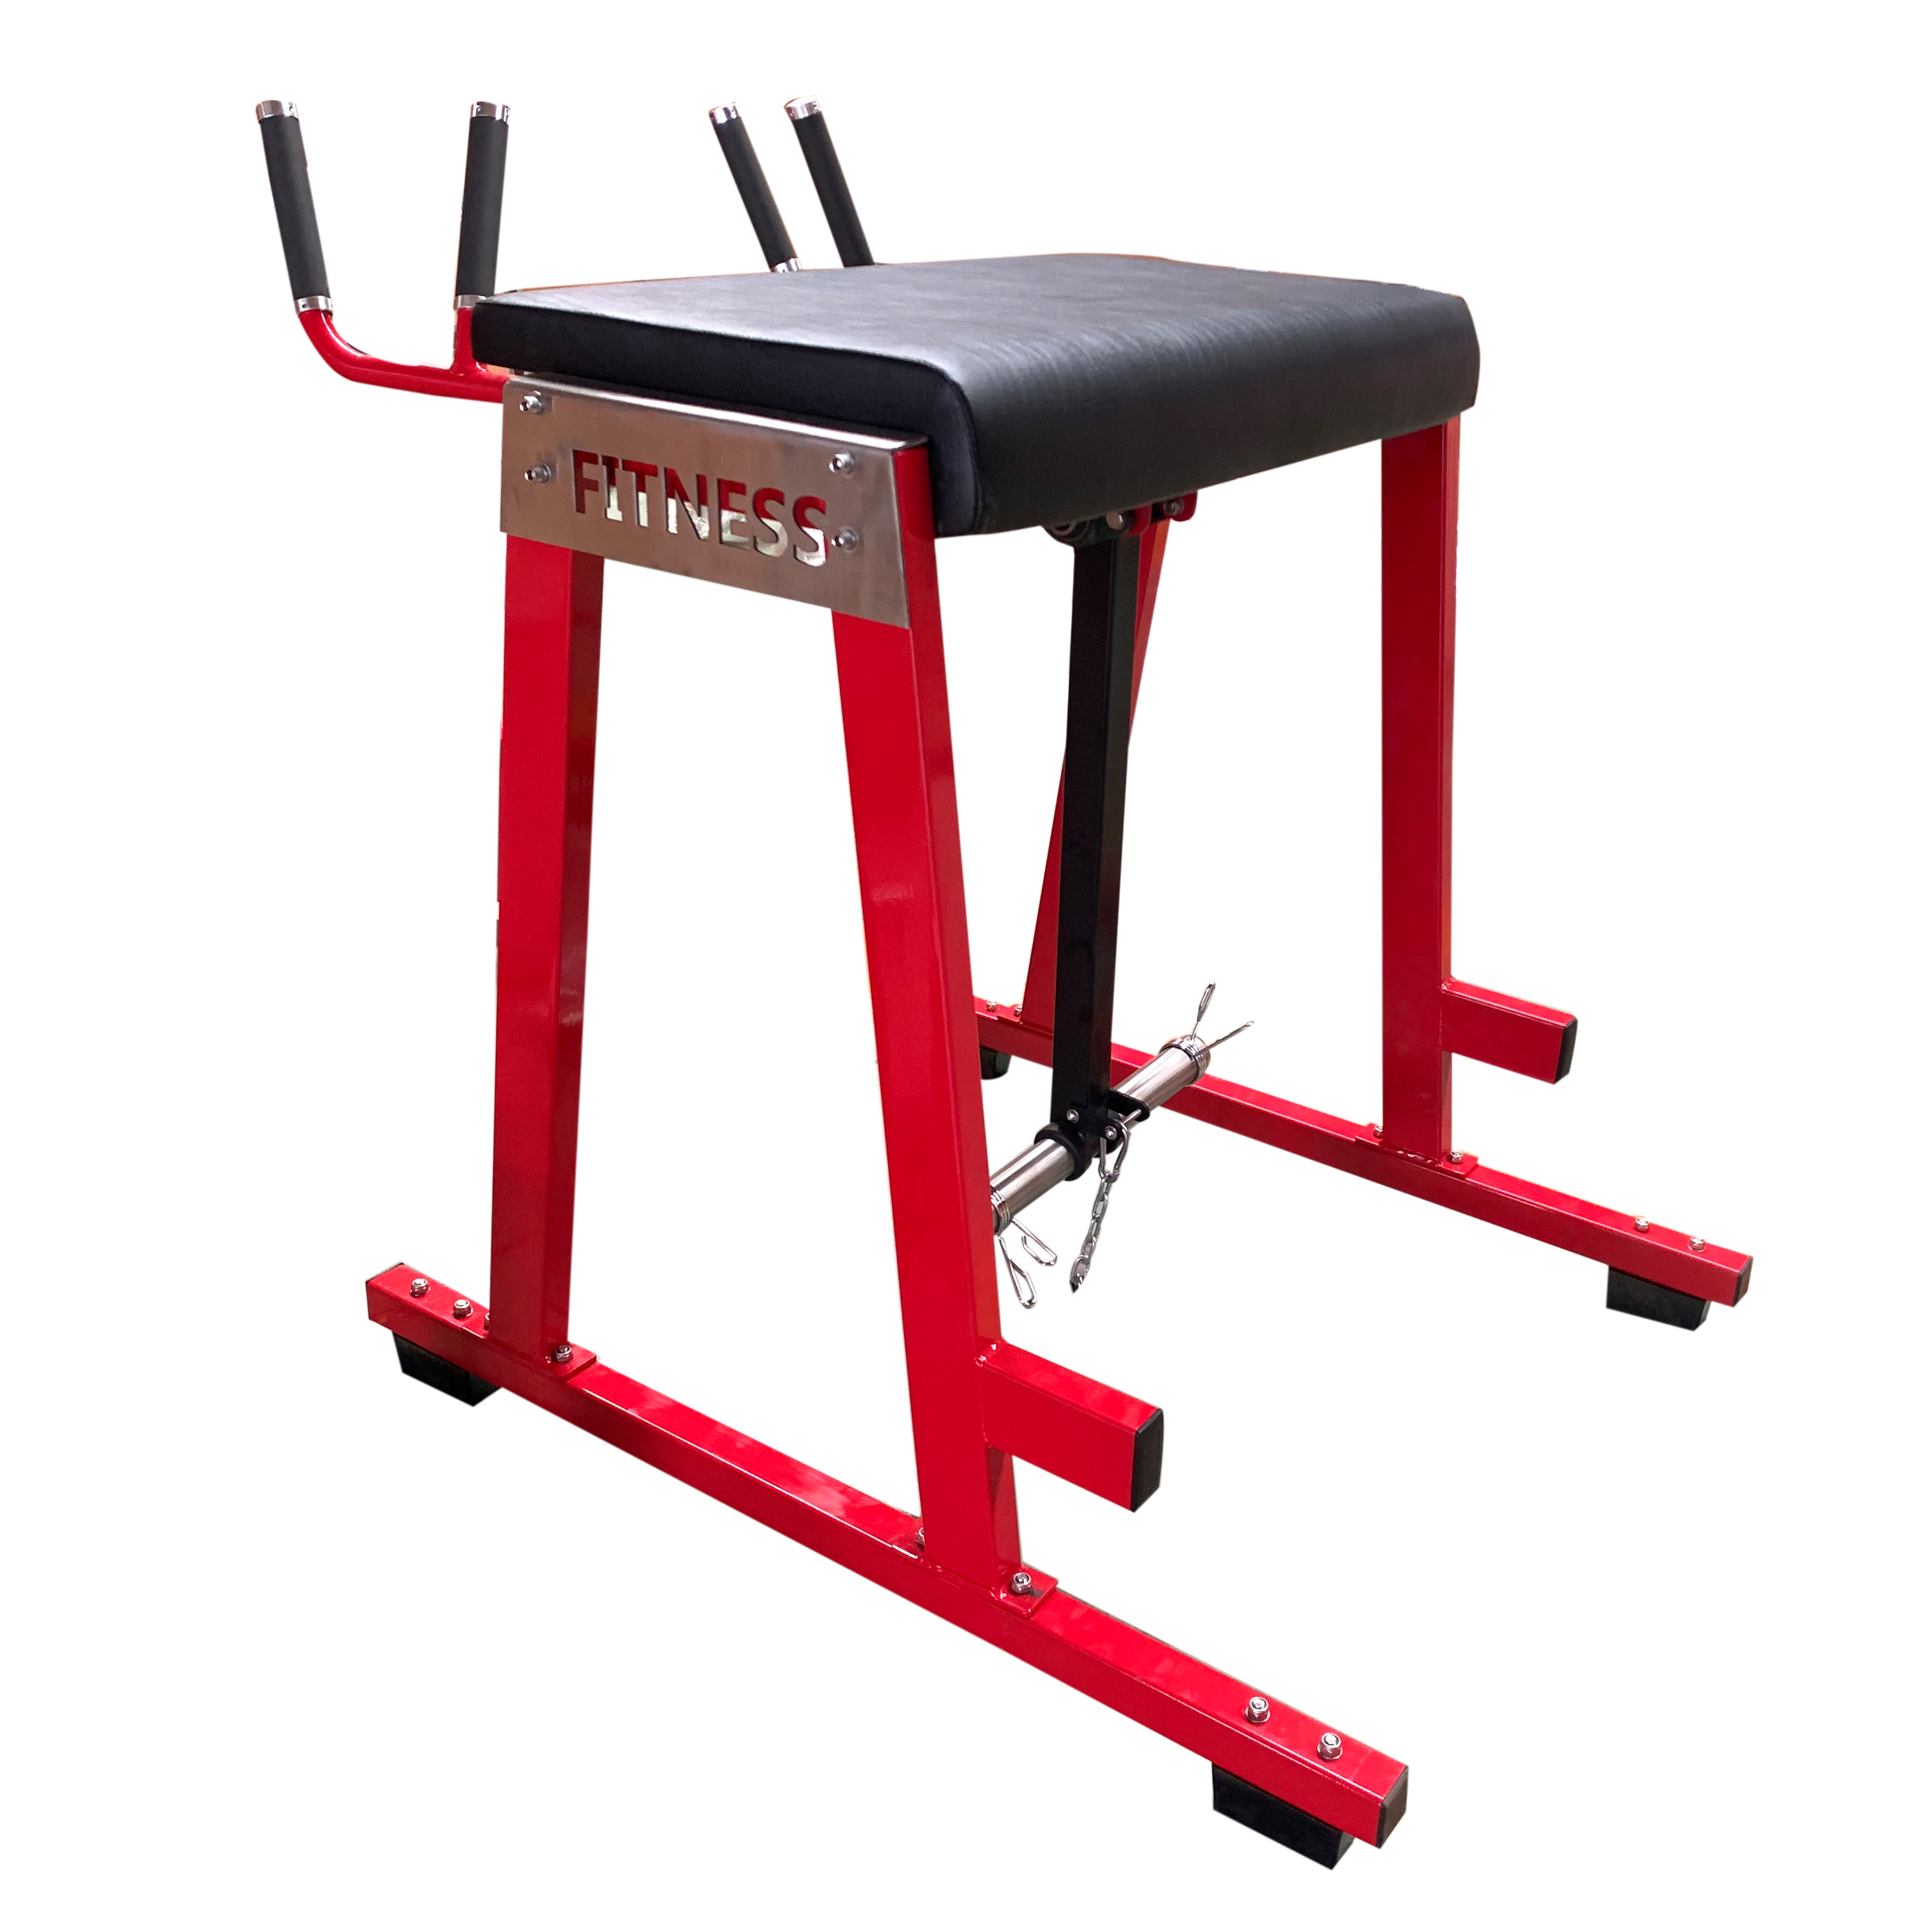 The Best Gym Equipment Reverse Hyper Extension Machine for Back And Hip